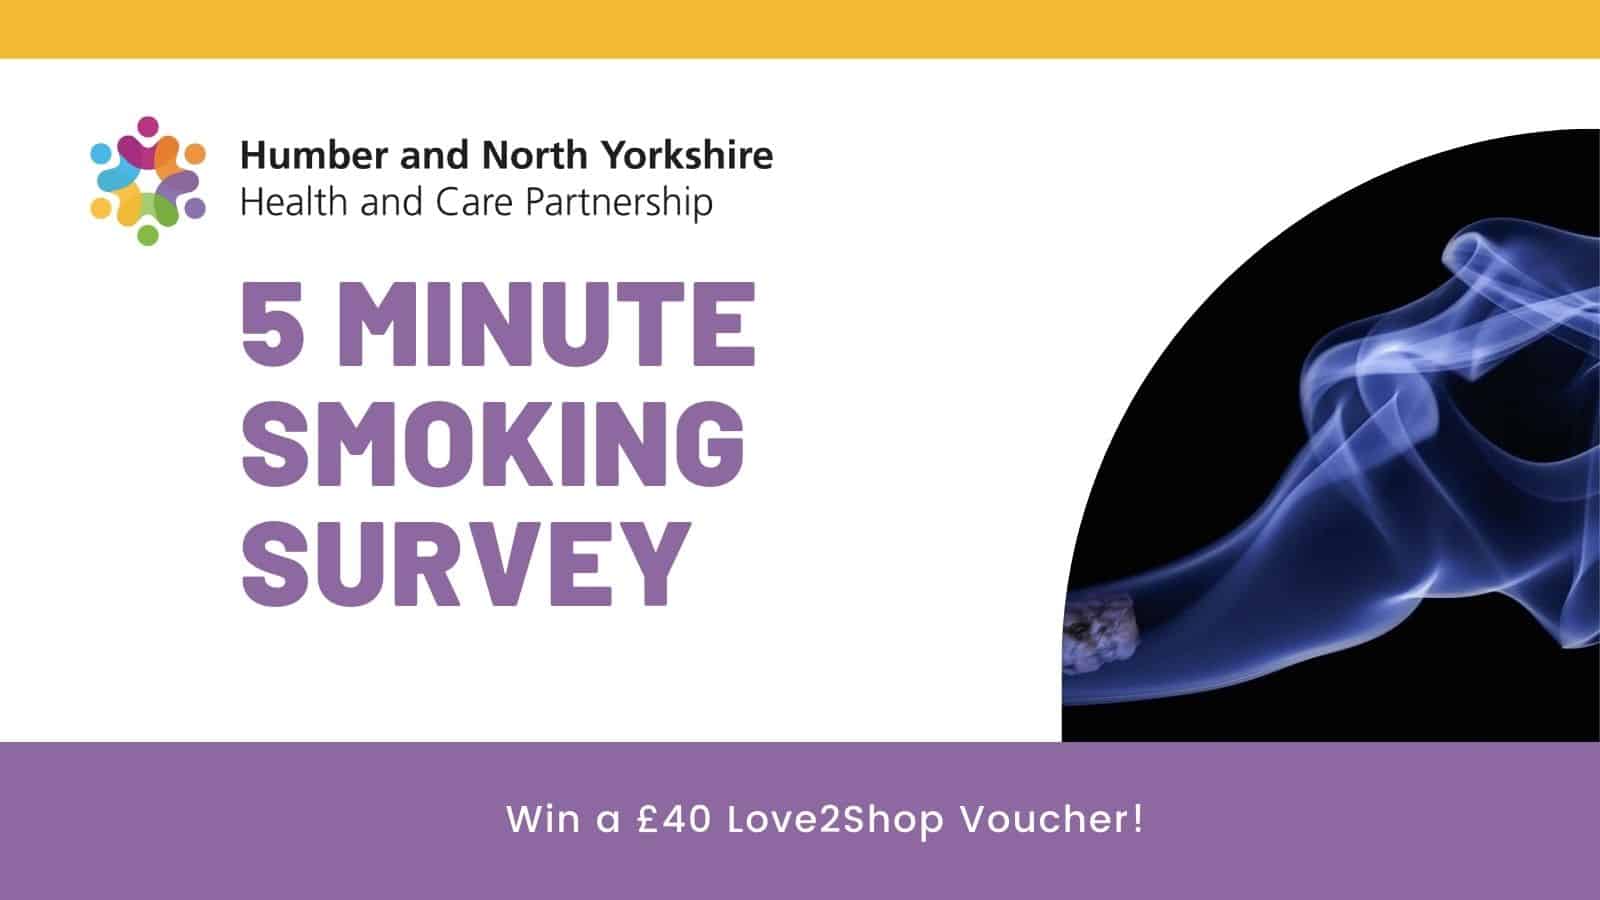 image of the 5 minute smoking survey with wording and a picture of smoke